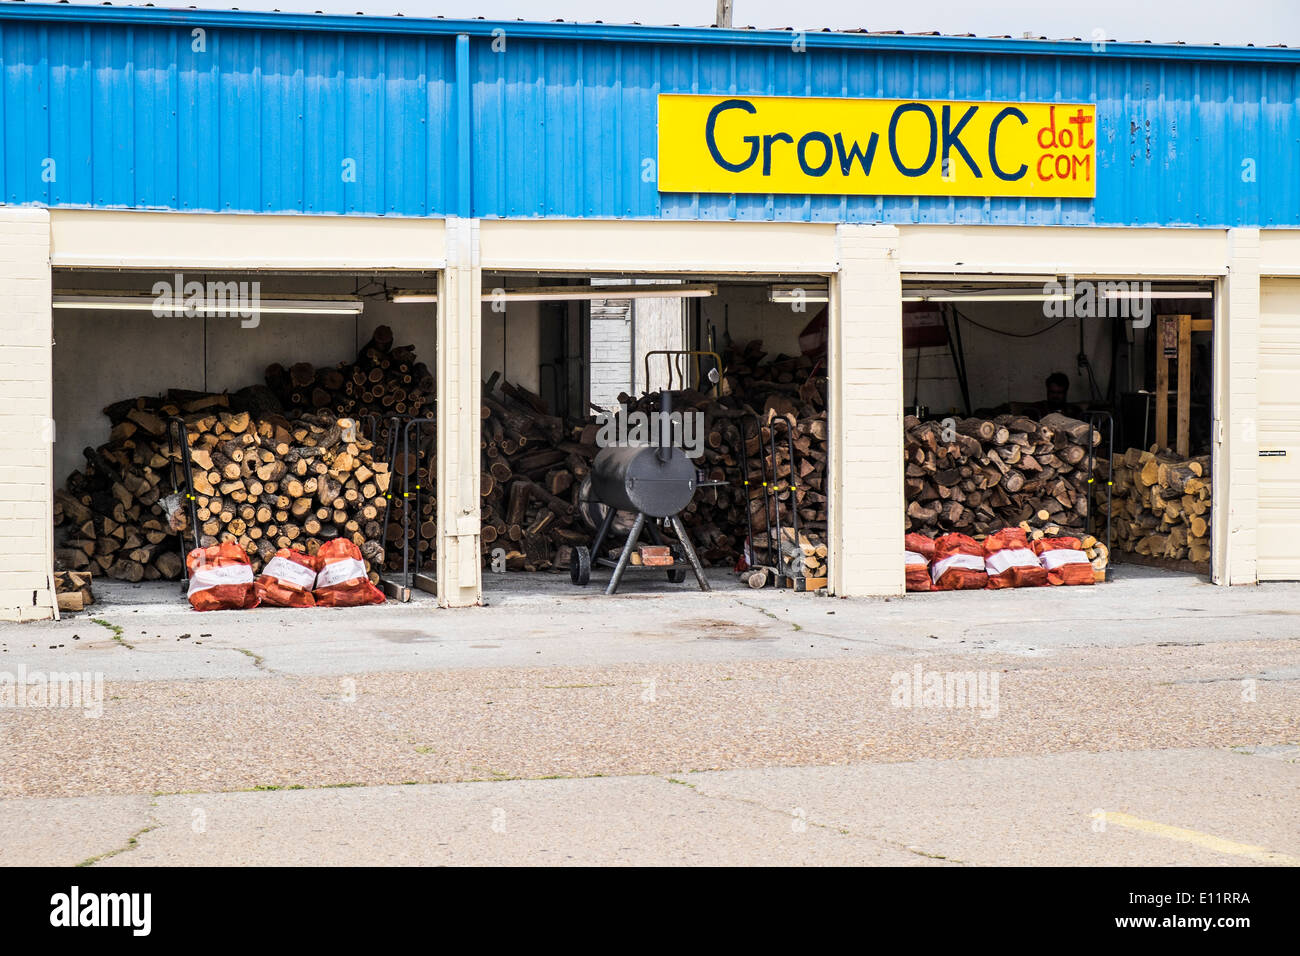 A business selling wood for meat smokers in a farmers market location in Oklahoma City, Oklahoma, USA. Stock Photo